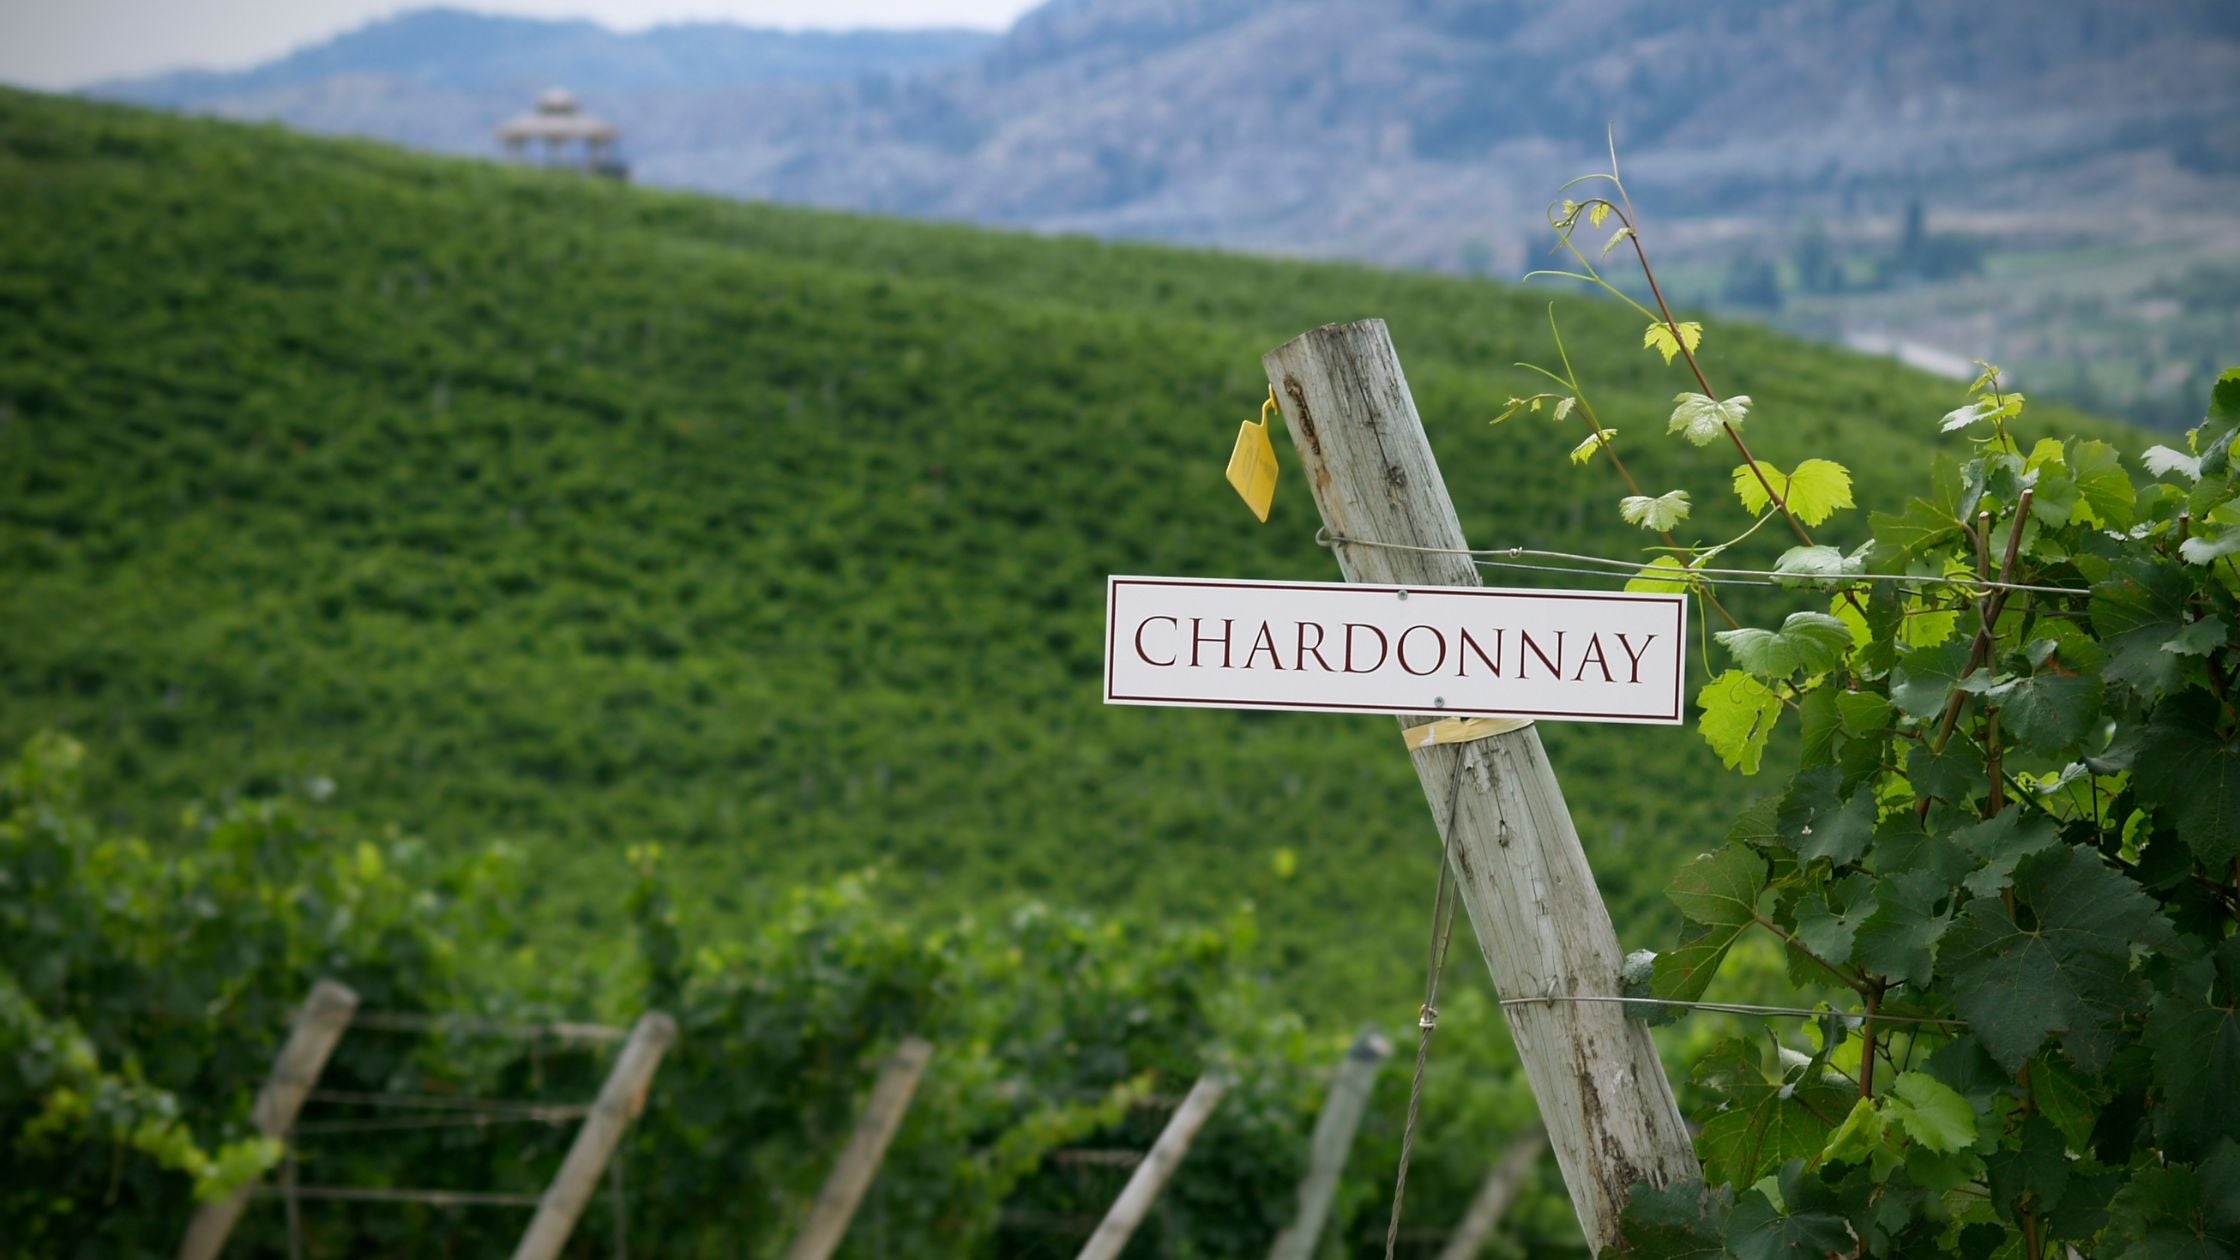 Chardonnay: A Wine Drinkers Guide